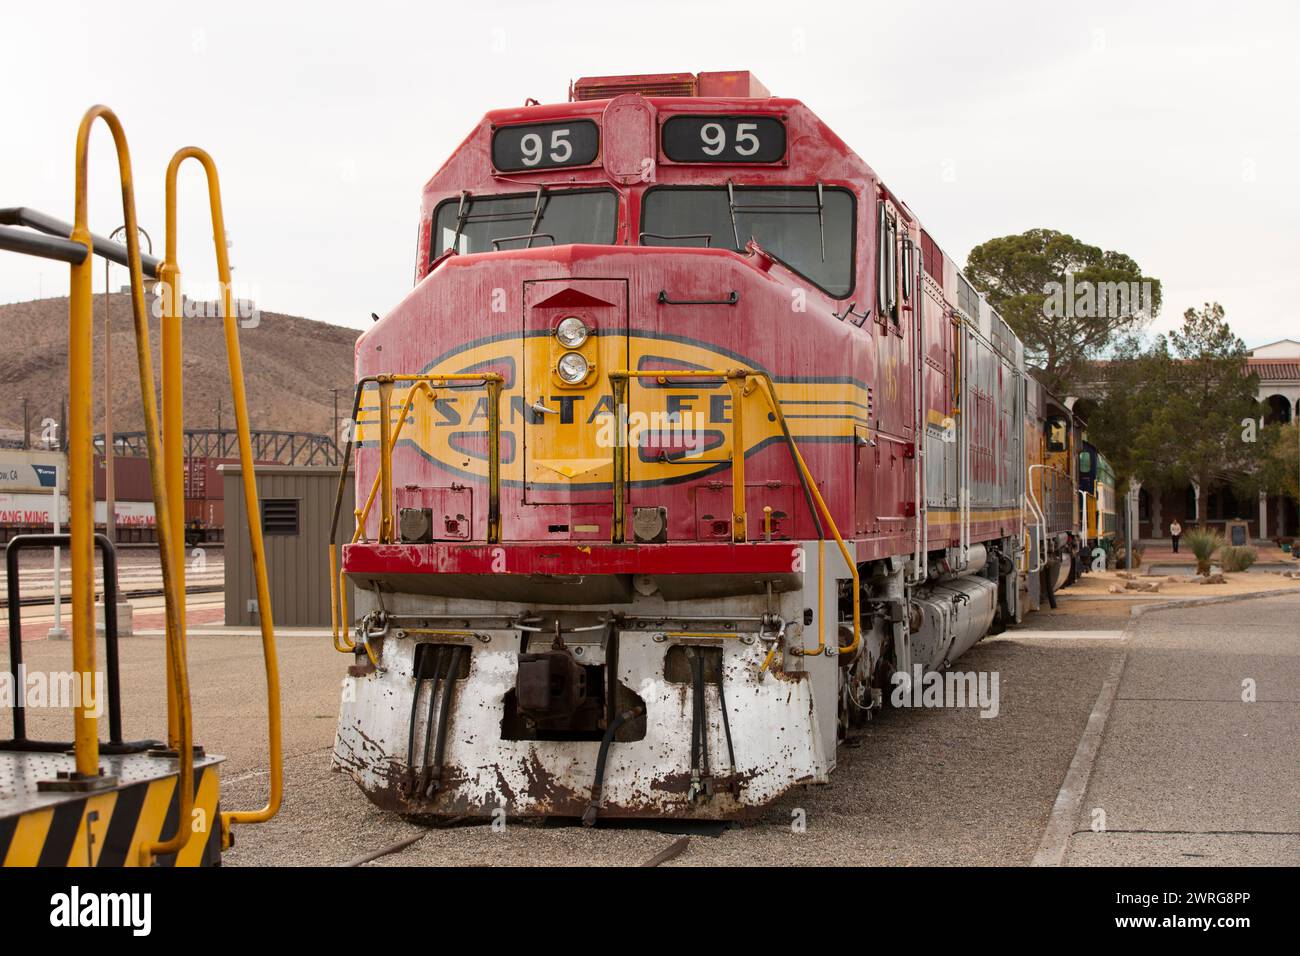 Barstow, California, USA - June 20, 2020:  A Santa Fe train engine rests at the Barstow station. Stock Photo